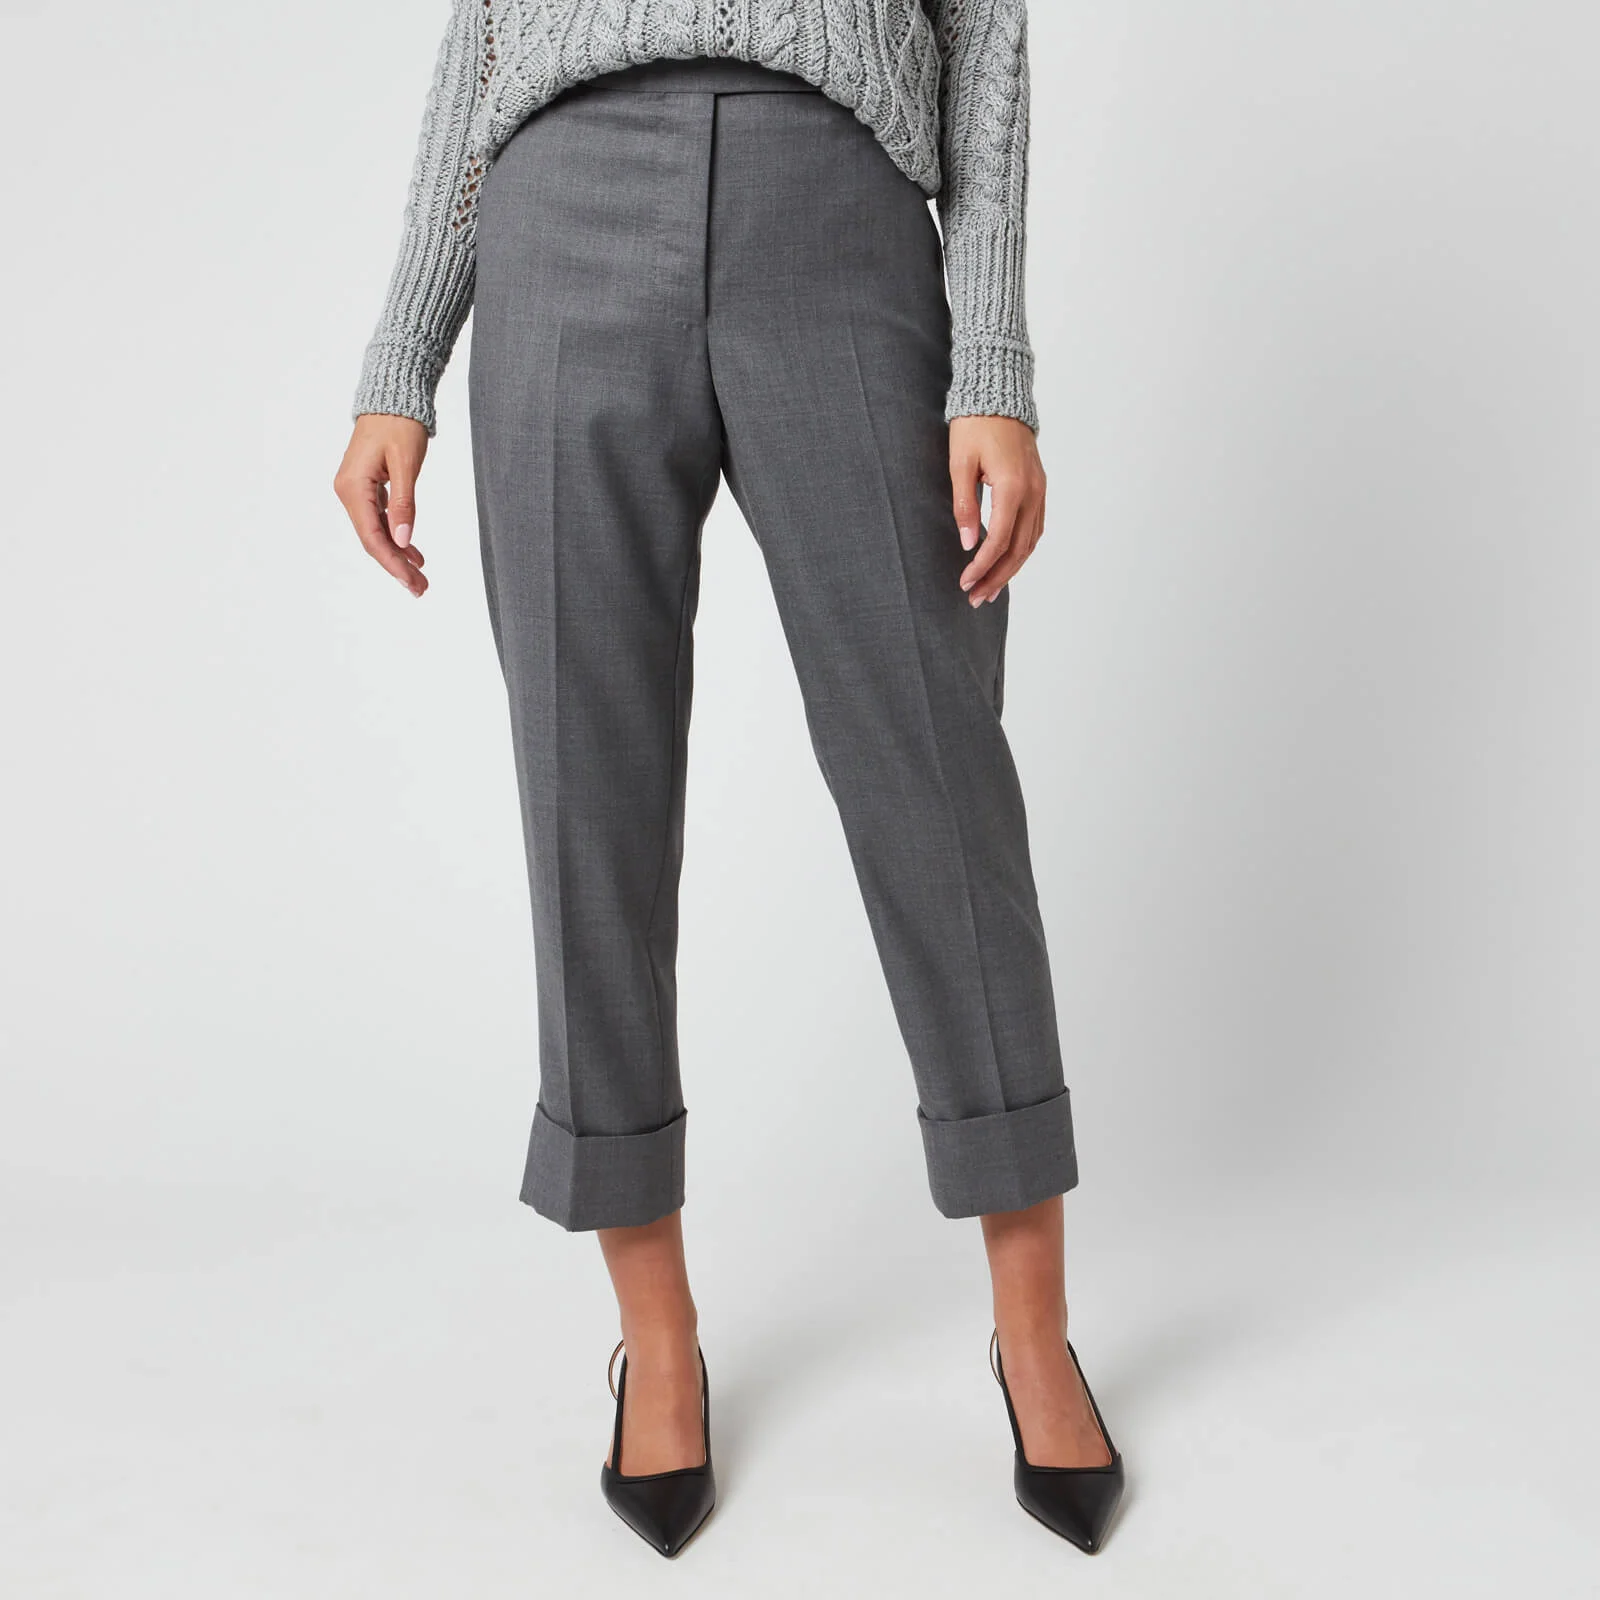 Thom Browne Women's Classic Backstrap Trousers - Med Grey Image 1